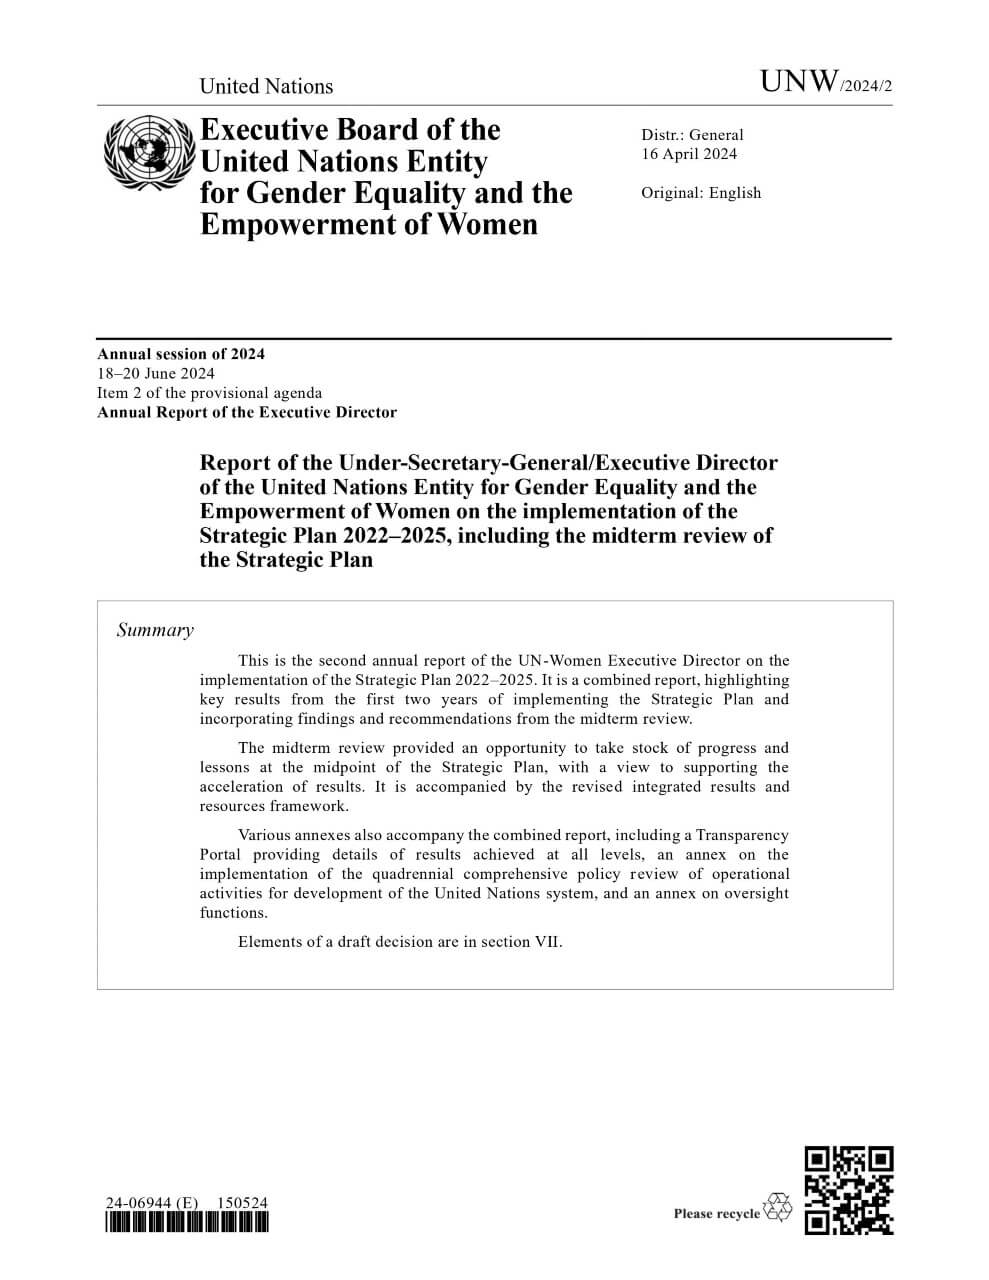 Report of the Under-Secretary-General/Executive Director of the United Nations Entity for Gender Equality and the Empowerment of Women on the implementation of the Strategic Plan 2022–2025, including the midterm review of the Strategic Plan (UNW/2024/2)